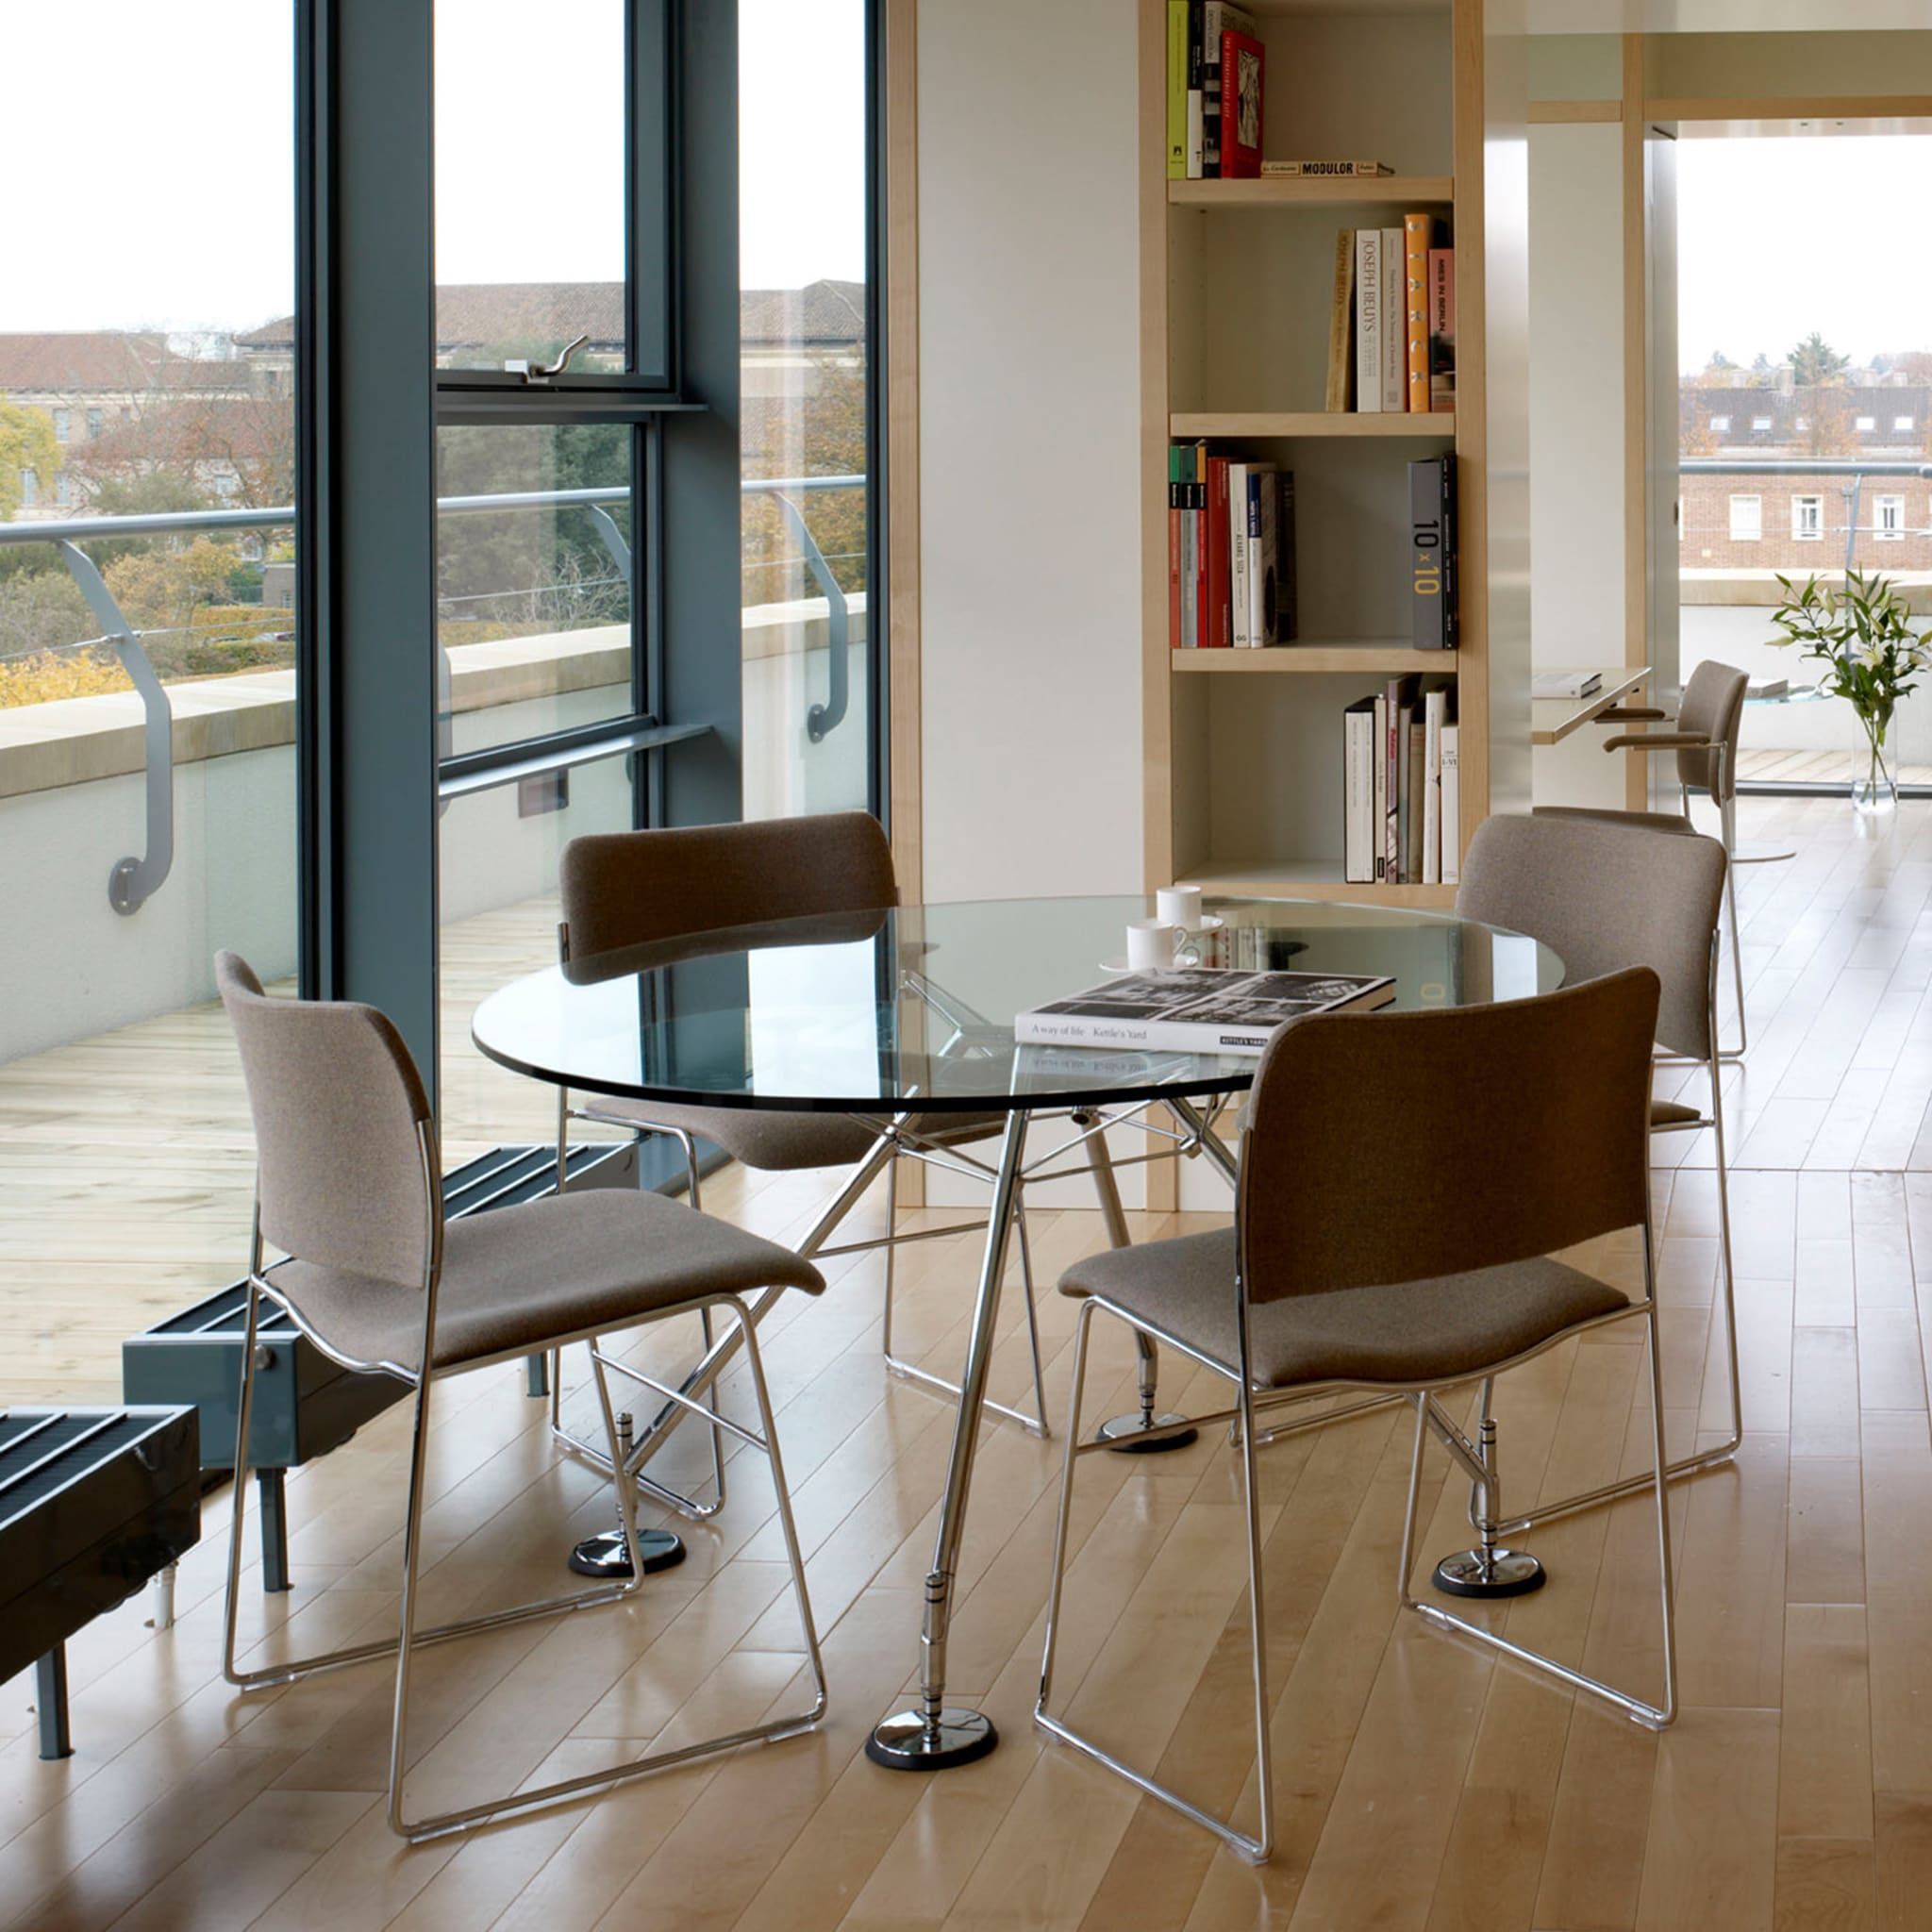 Nomos Round Table by Norman Foster - Alternative view 1